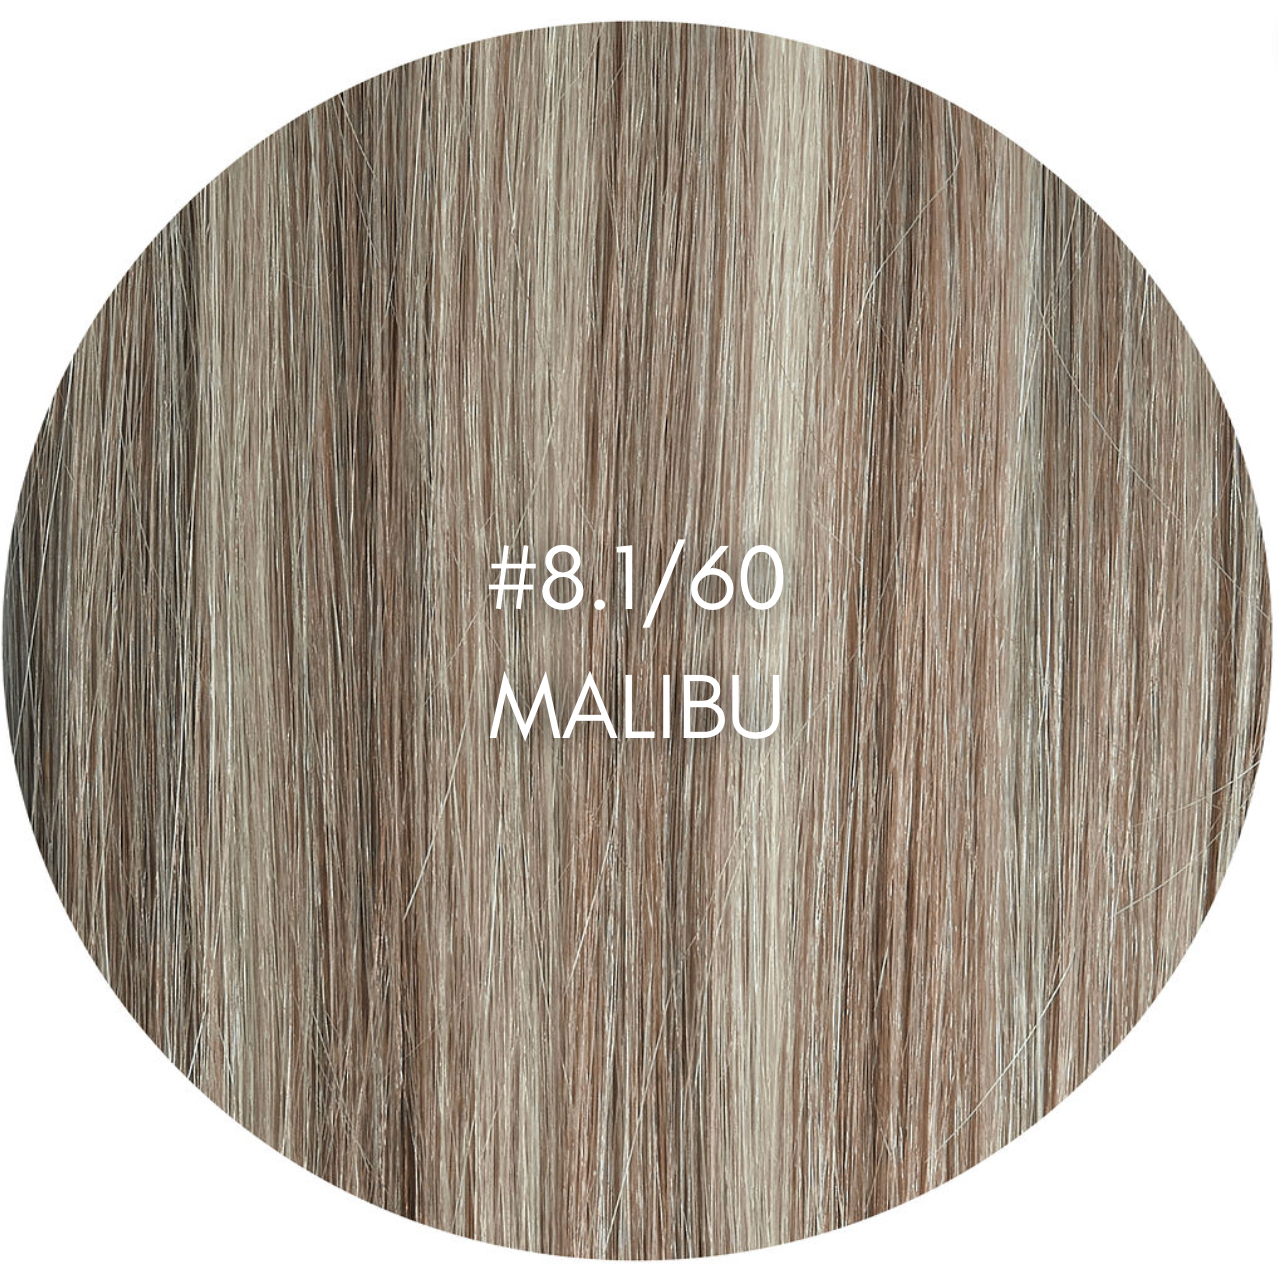 Invisi wefts